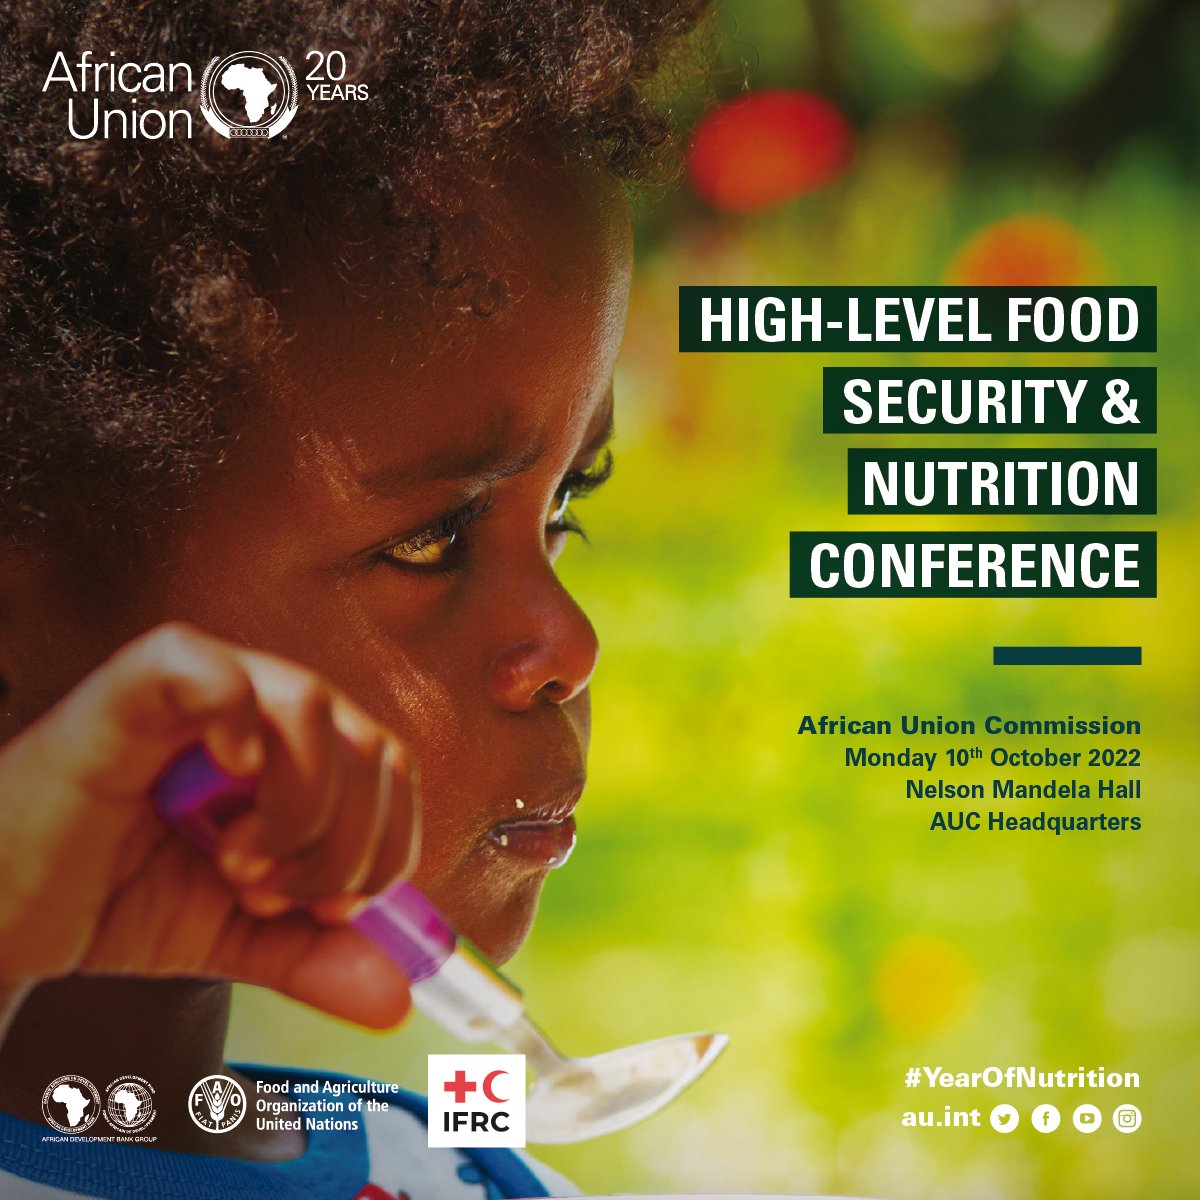 Honored to moderate High-level Food Security & Nutrition conference as our ministers of #Agriculture & other dignitaries deliberate on actions to strengthen Resilience in #Nutrition & #FoodSecurity,Agro-FoodSystems as well as advancing African Common Position presented @UNFSS2021